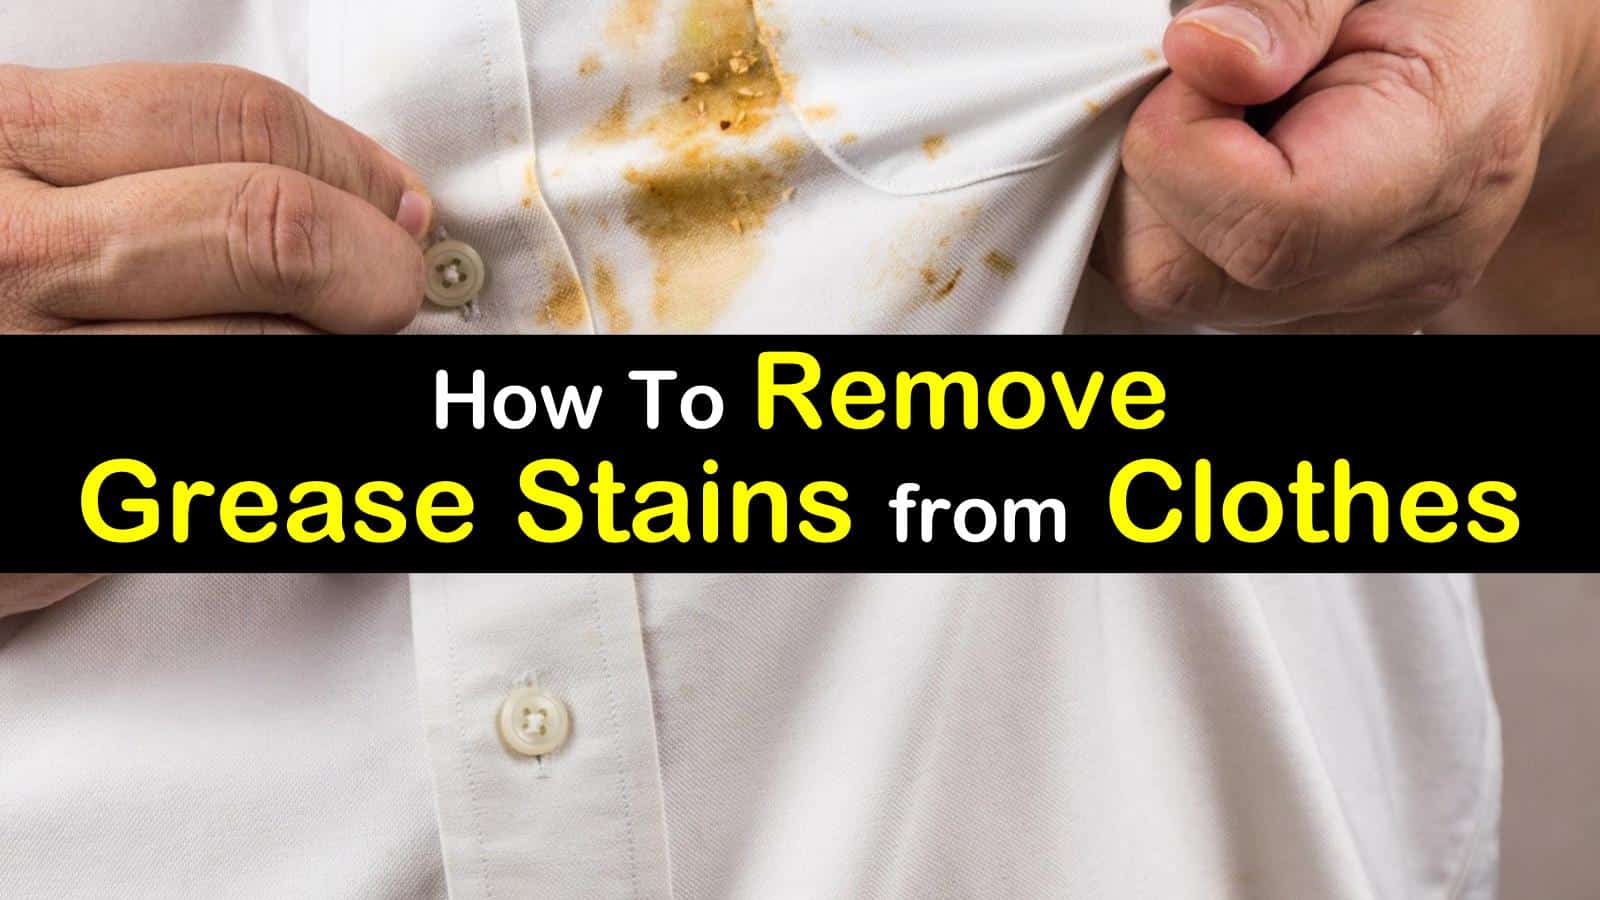 15 Clever Ways to Remove Grease Stains from Clothes